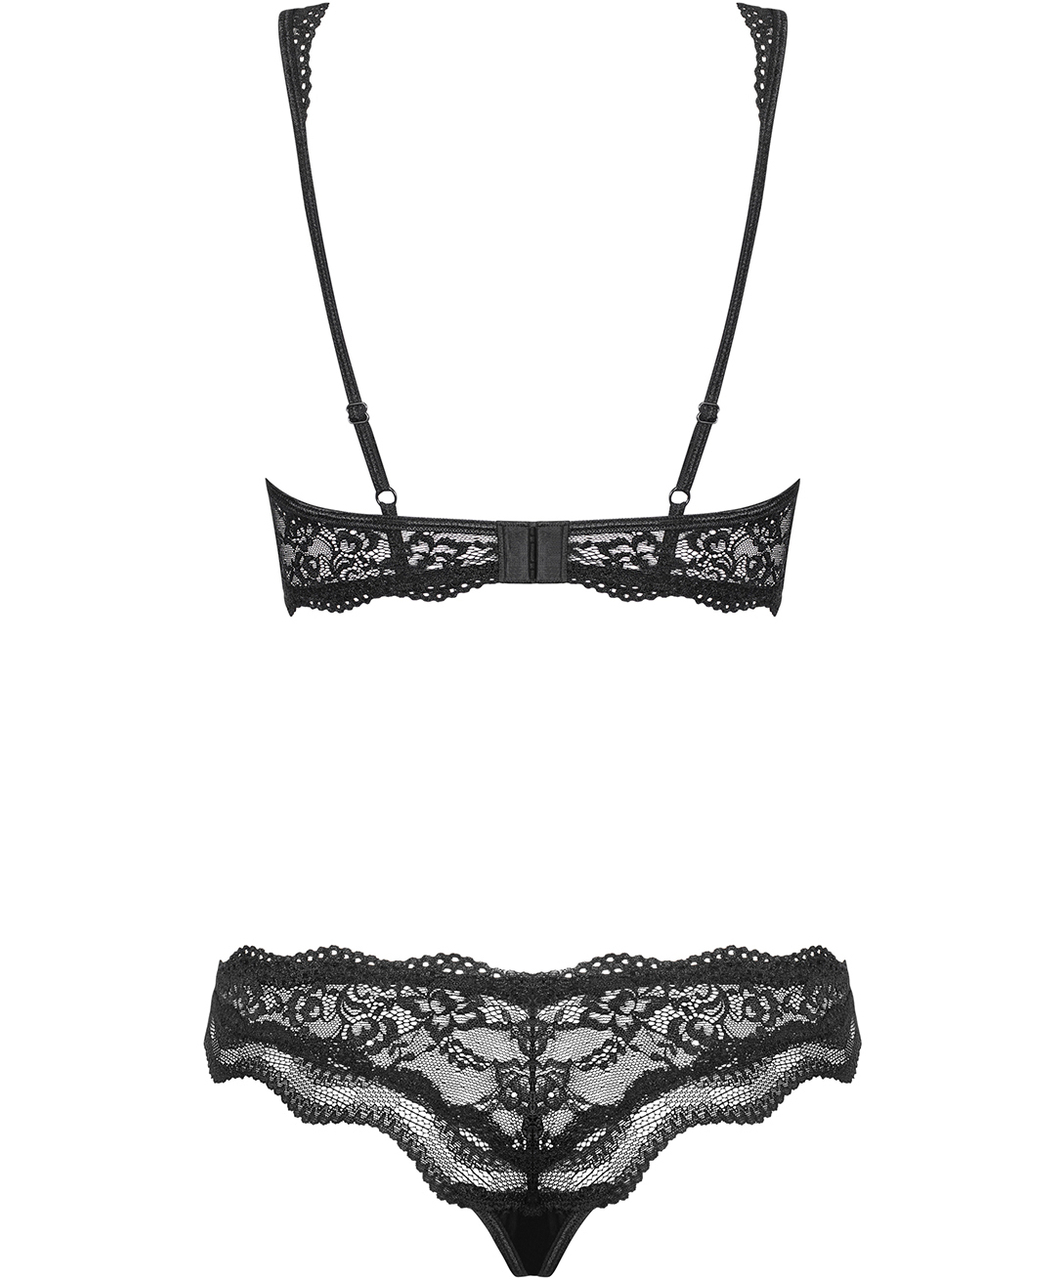 Obsessive Luvae Black Lace Lingerie Set Sexystyleeu